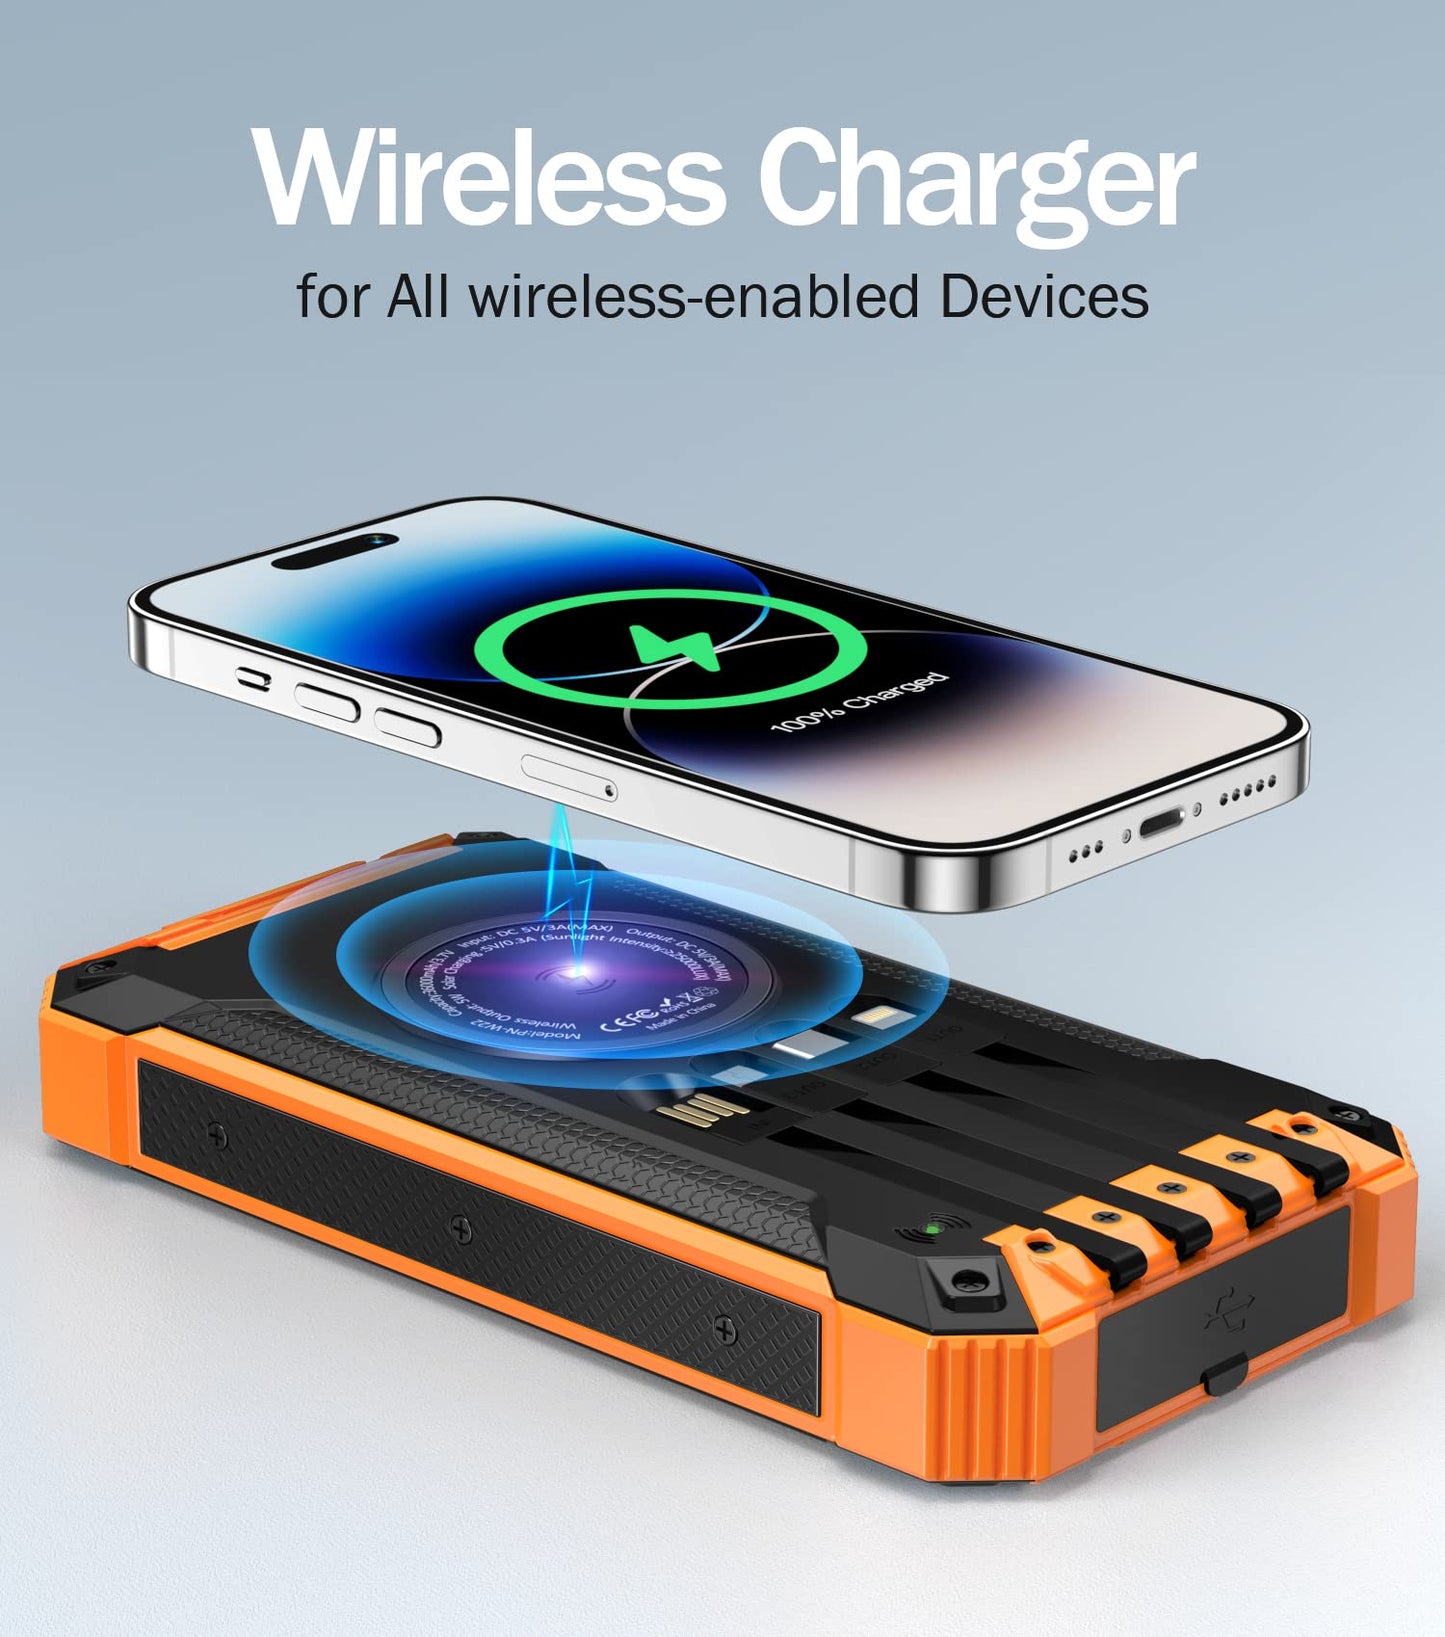 GOODaaa Power Bank Wireless Charger 36000mAh Built in 4 Cables Six Outputs 15W Fast Charging Power Bank for All Mobile Devices Three Inputs Solar Portable Charger with Dual Flashlights, Carabiner